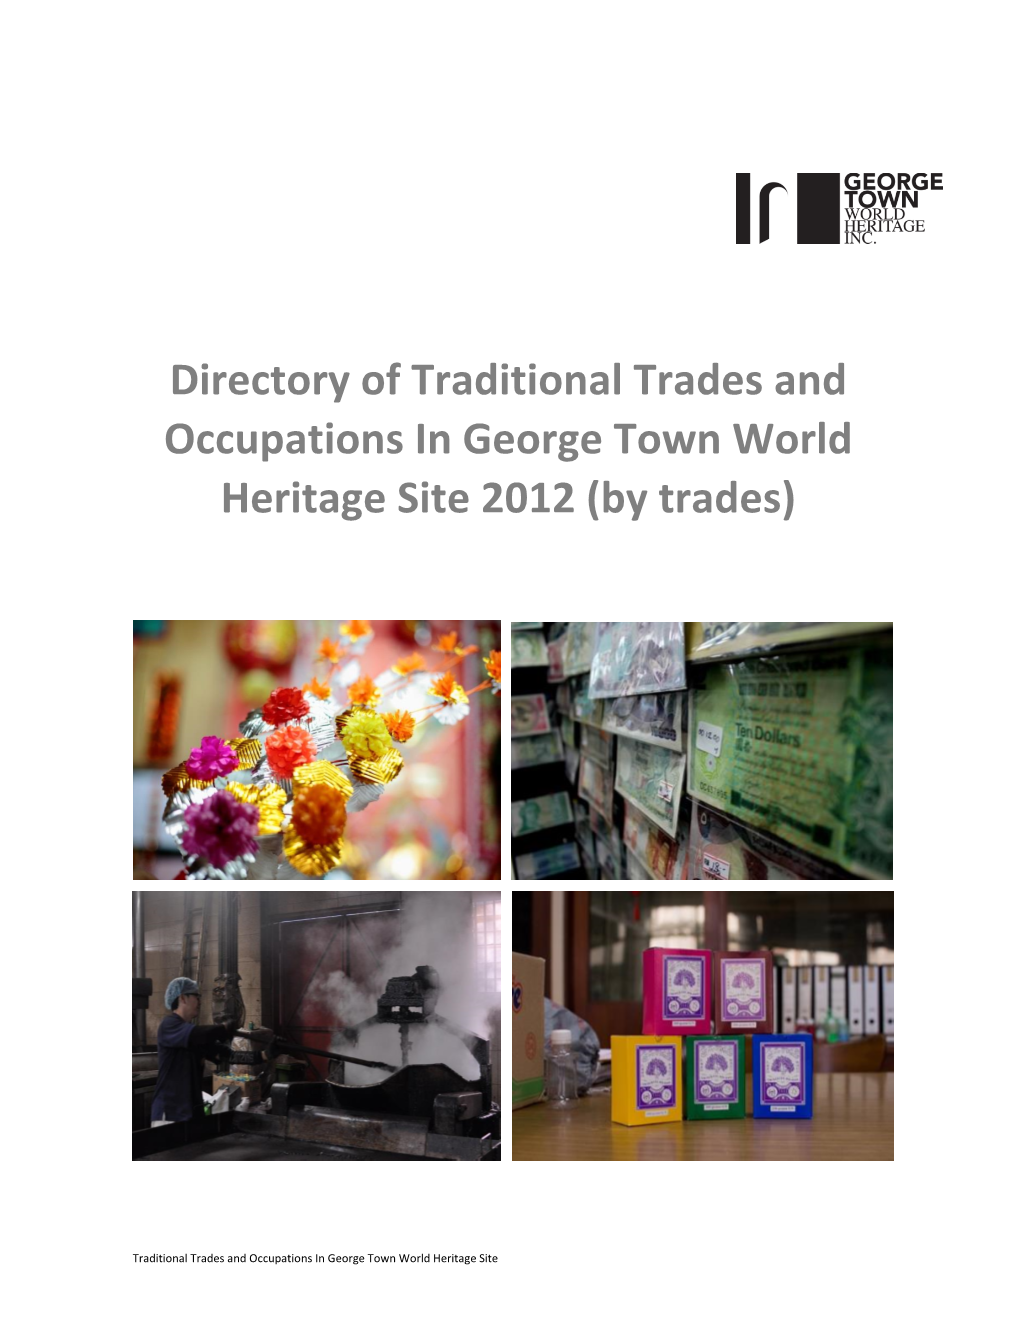 Directory of Traditional Trades and Occupations in George Town World Heritage Site 2012 (By Trades)